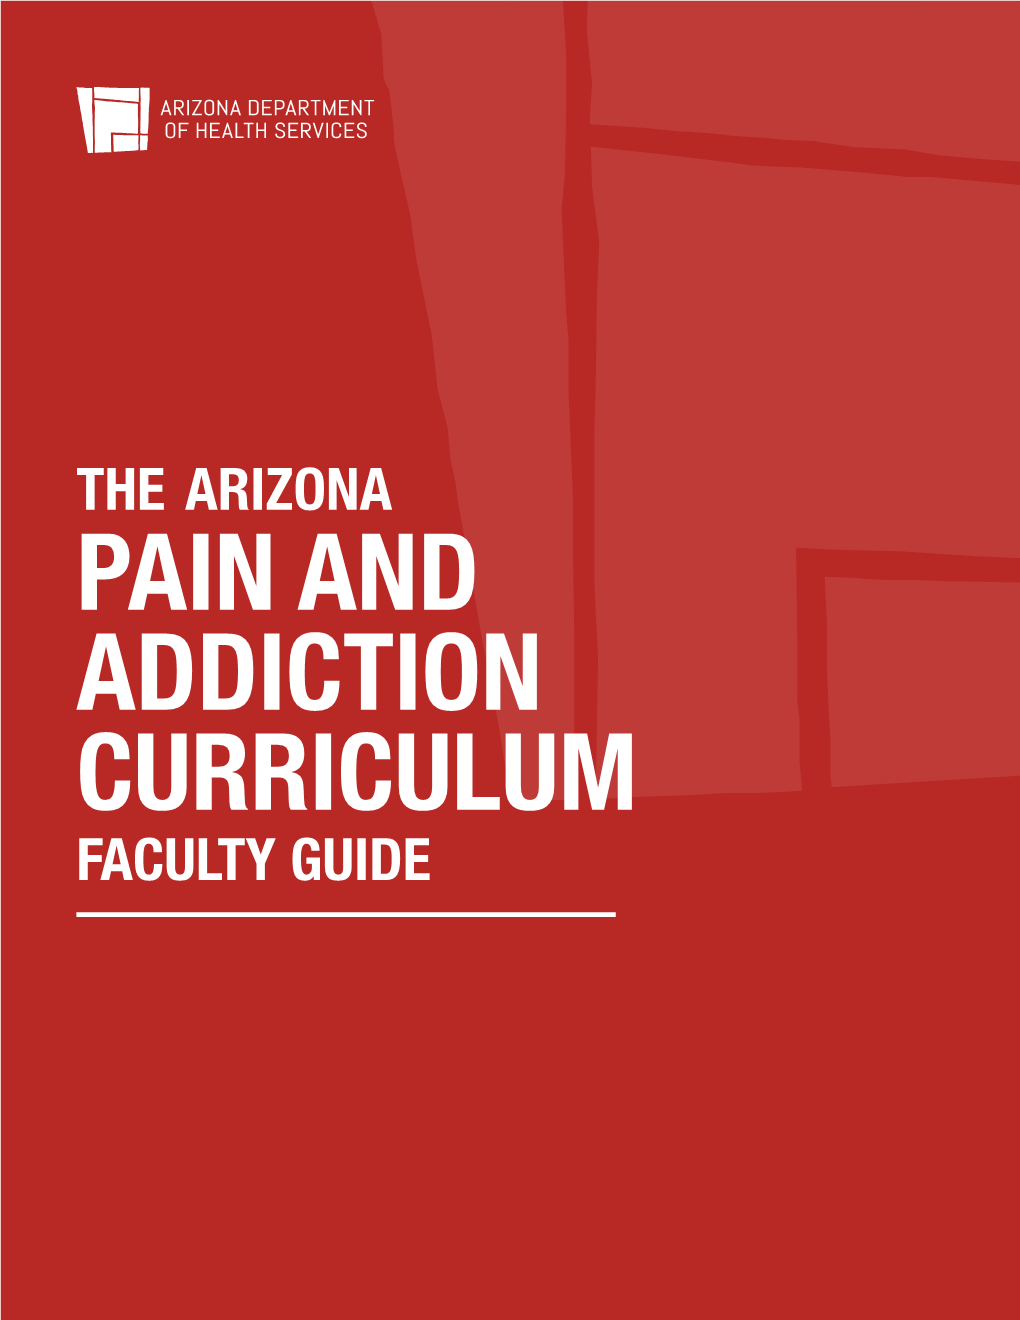 Arizona Pain and Addiction Curriculum Faculty Guide